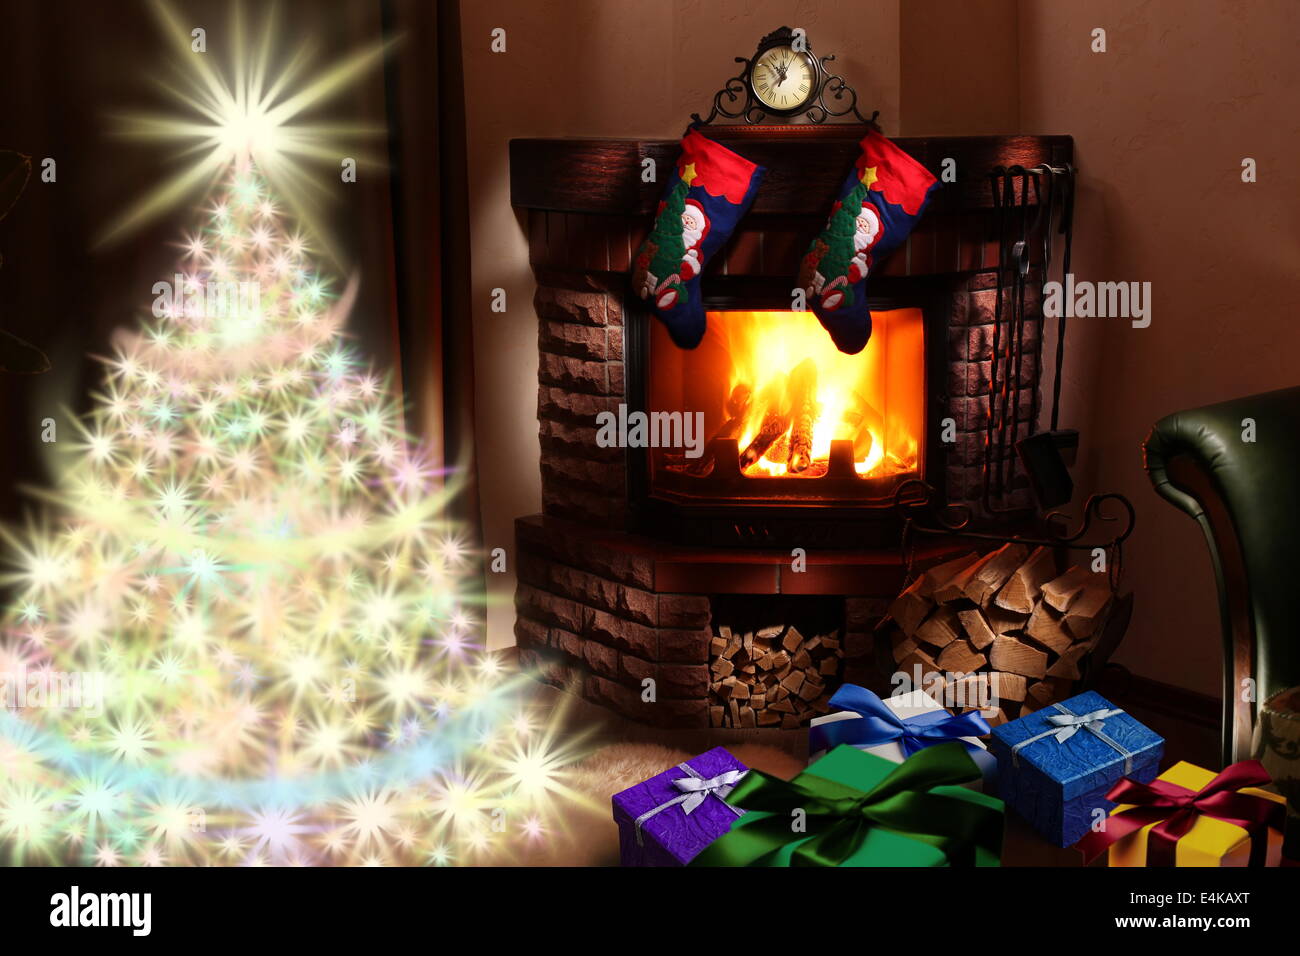 Christmas gifts by the fireplace. Stock Photo